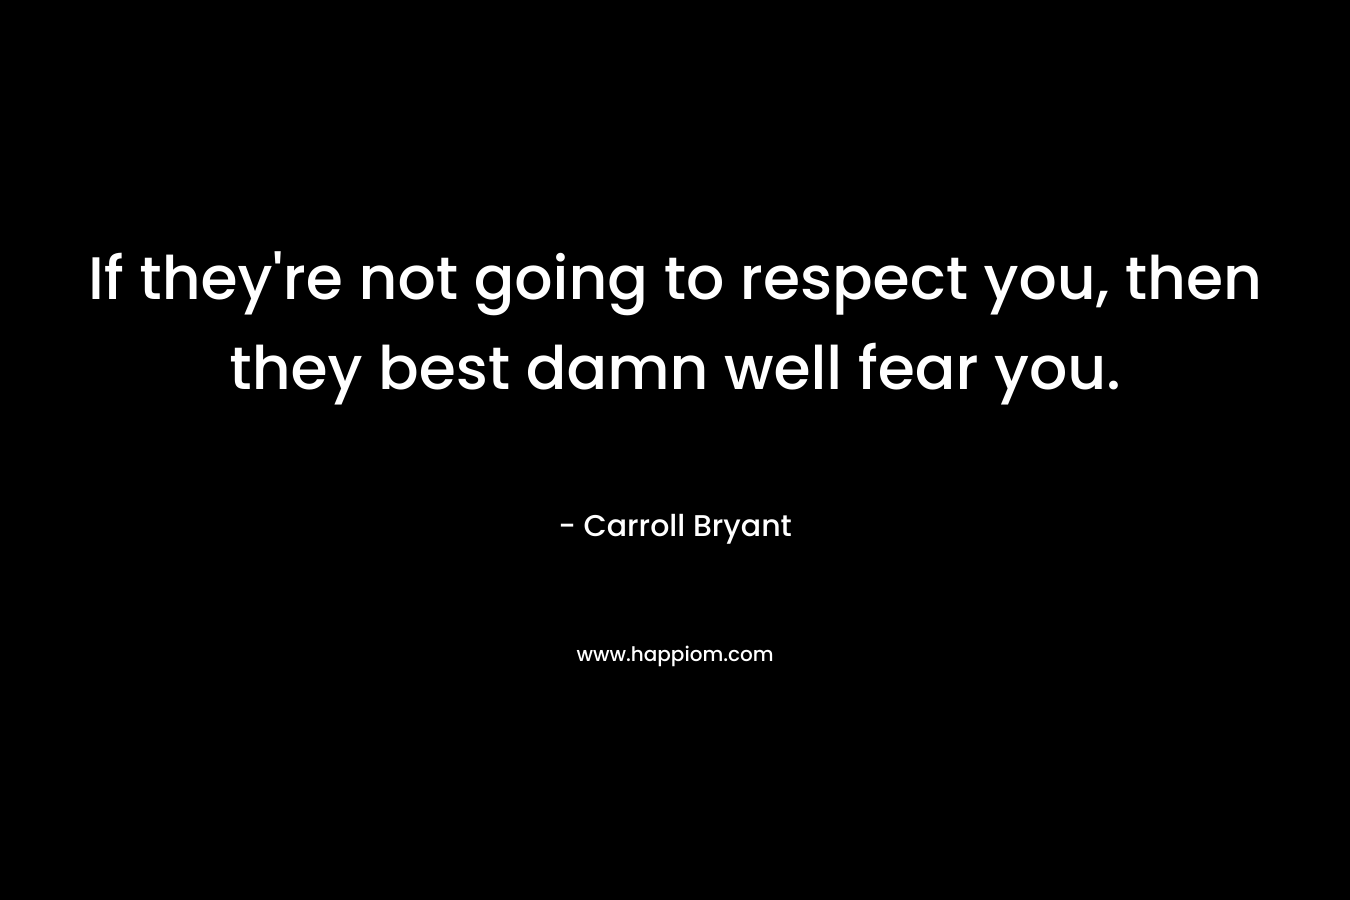 If they're not going to respect you, then they best damn well fear you.